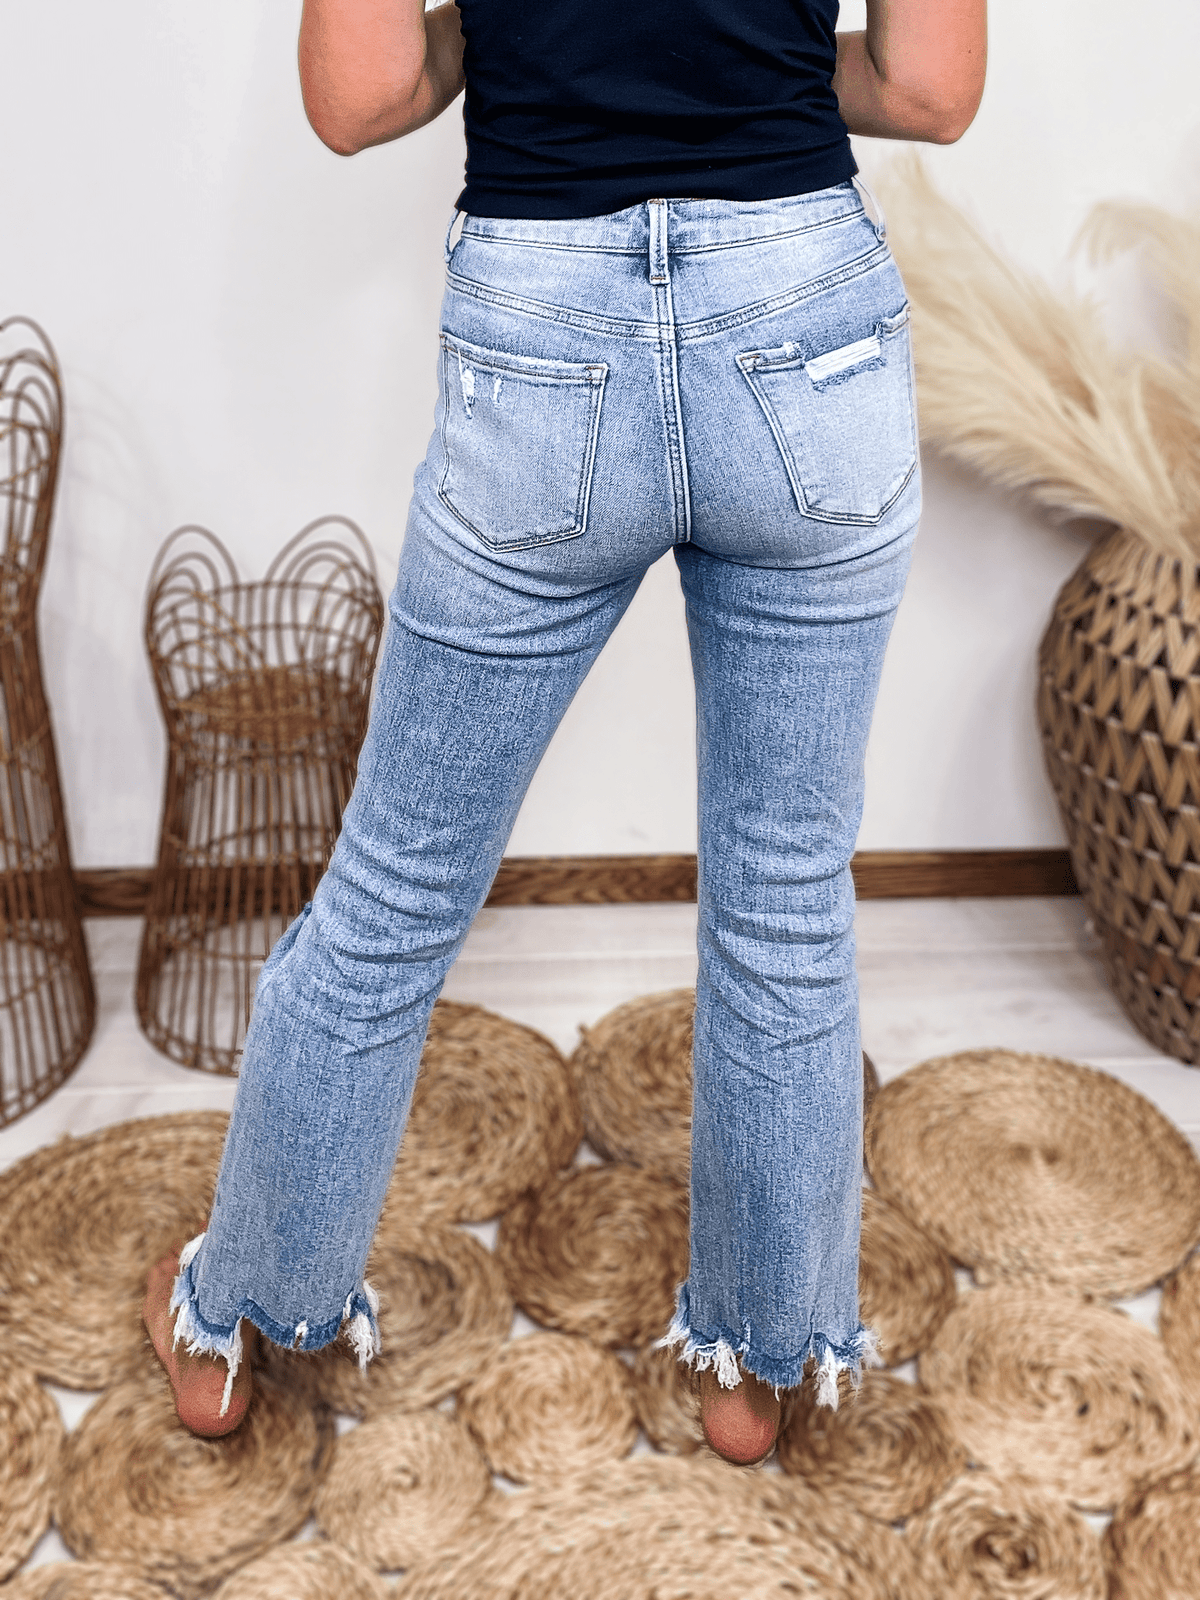 Women's Baggy Jeans: Embrace Comfort & Style with Trendy Denim